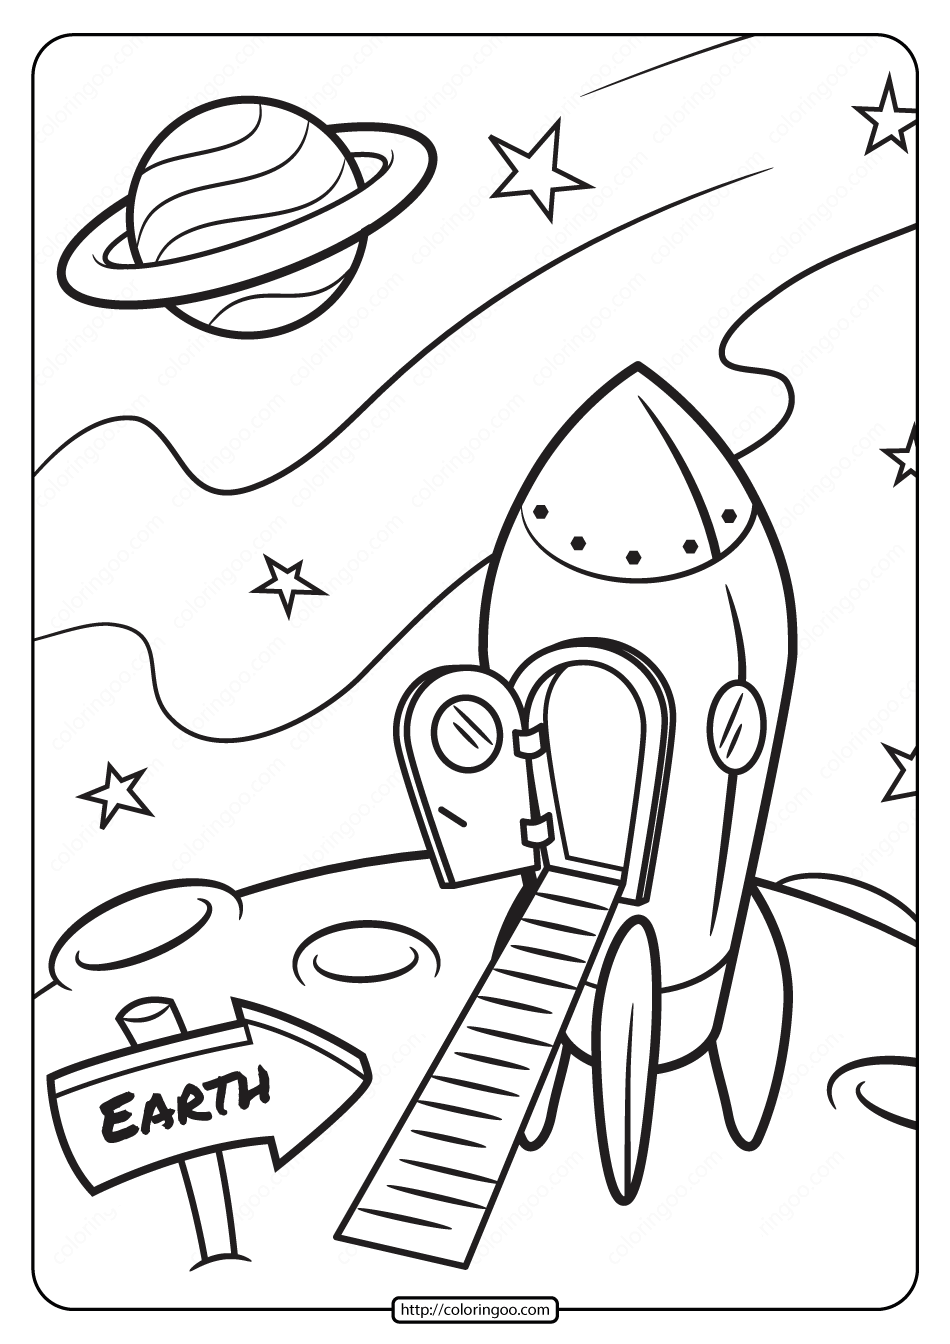 printable a rocket on the moon surface coloring page